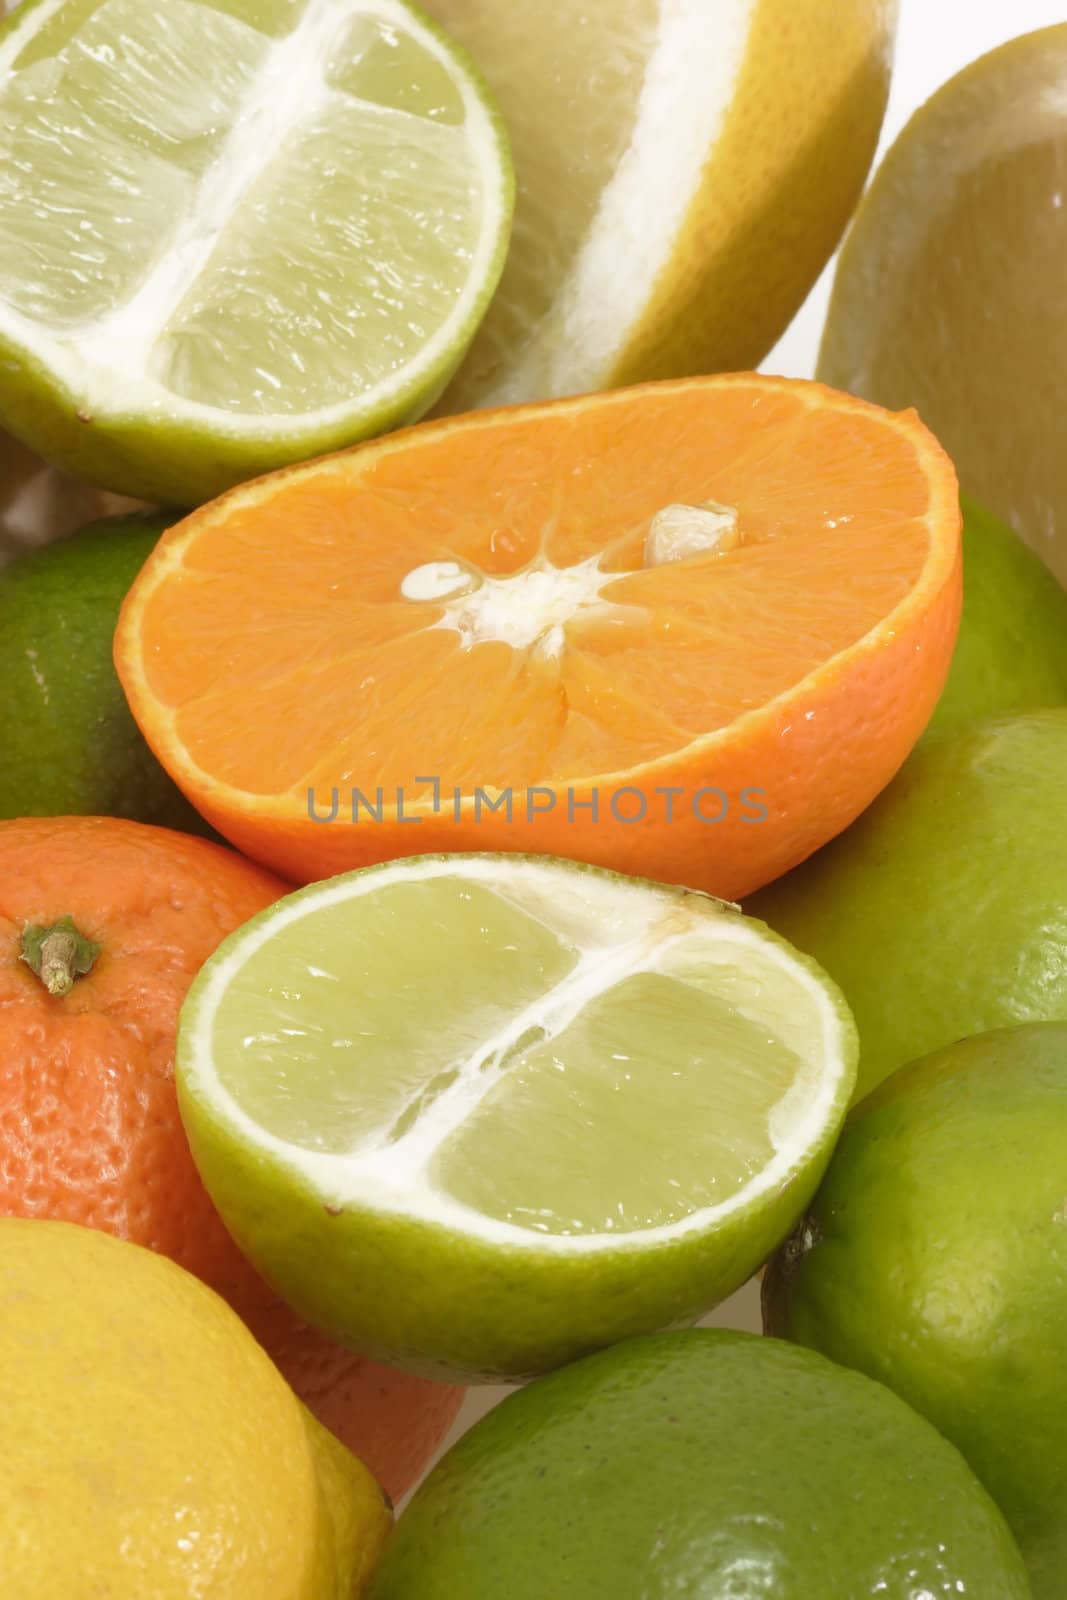 Colorful fresh and  healthy fruits on bright background